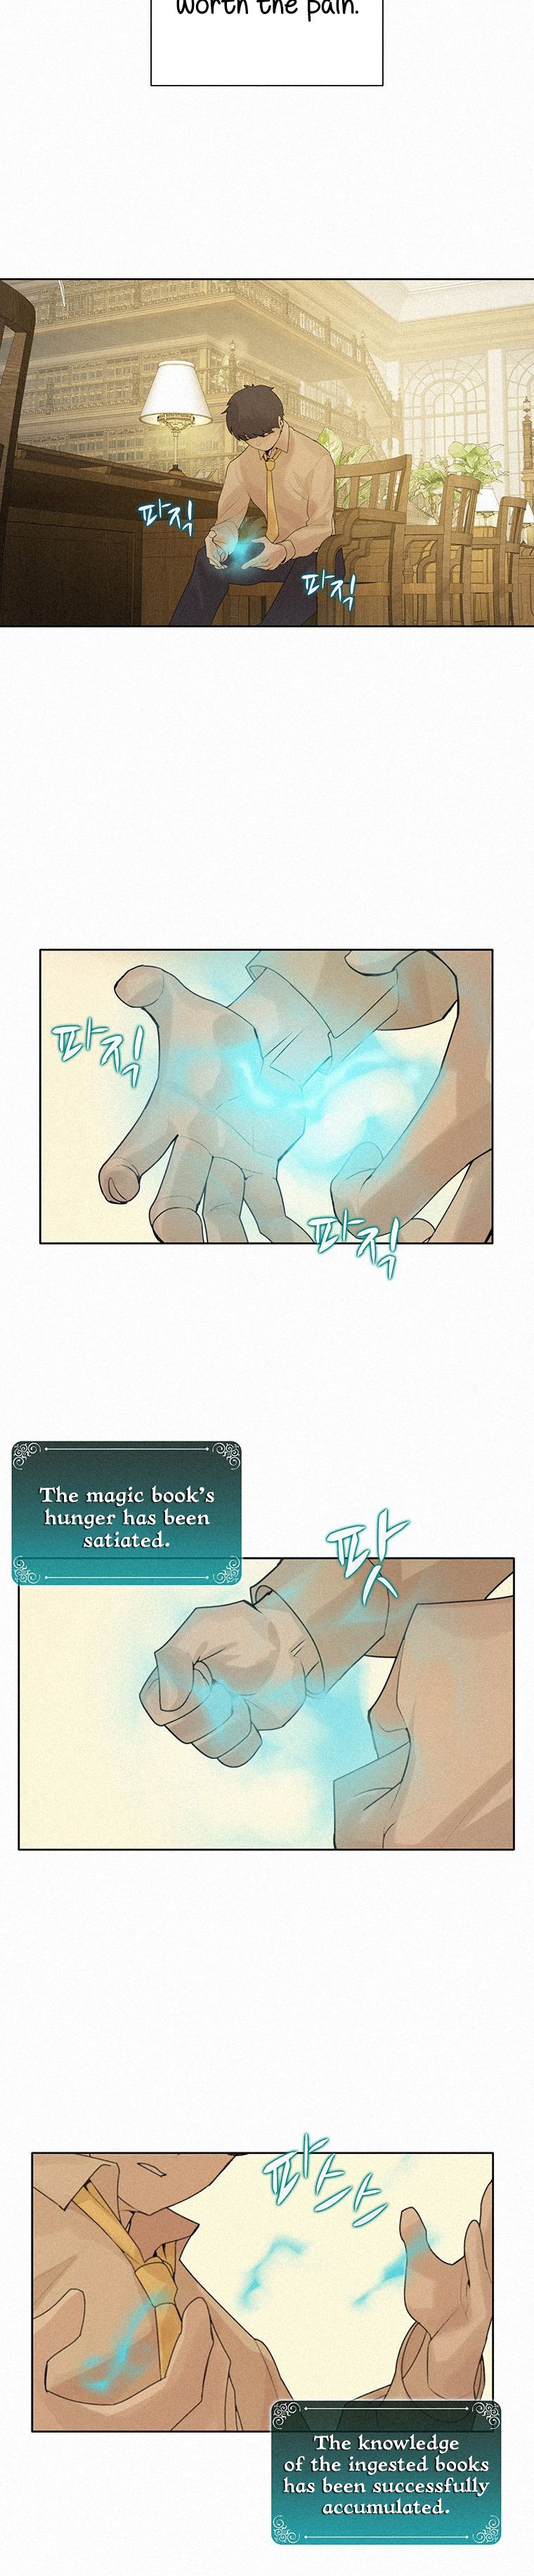 The Book Eating Magician - Chapter 2 Page 20